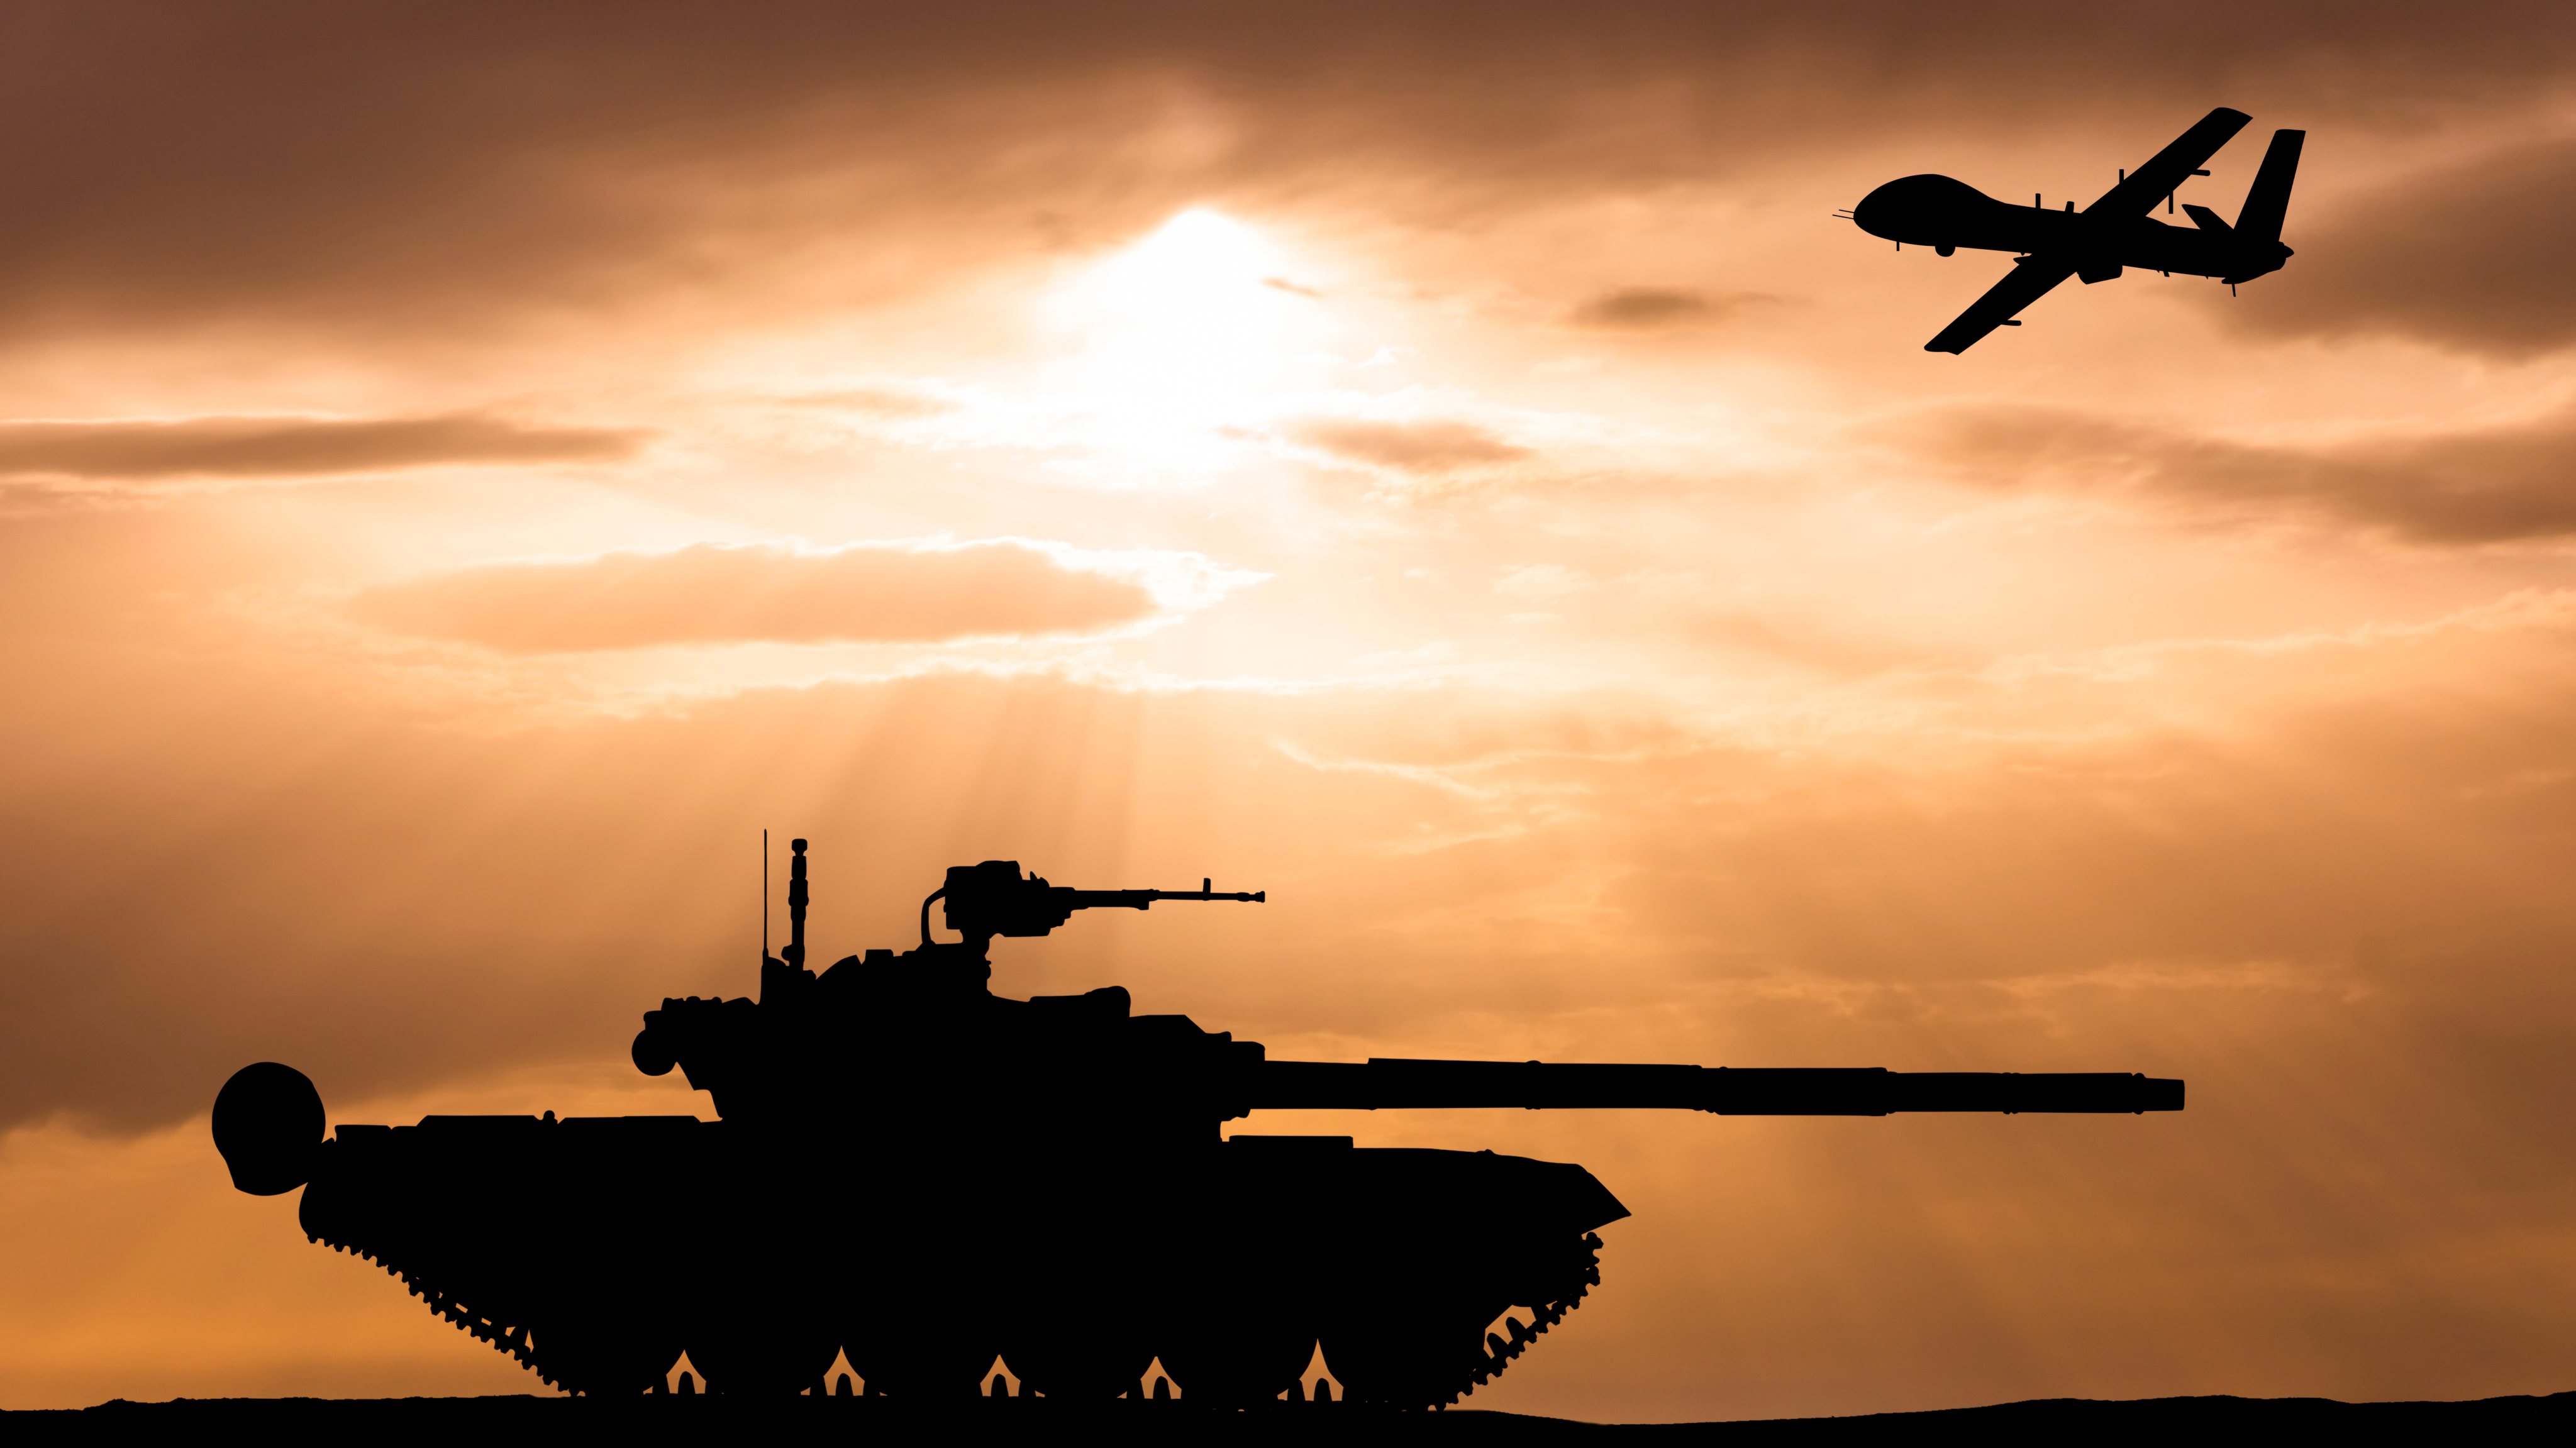 Armored tank and combat drone on the background of the sunset sky